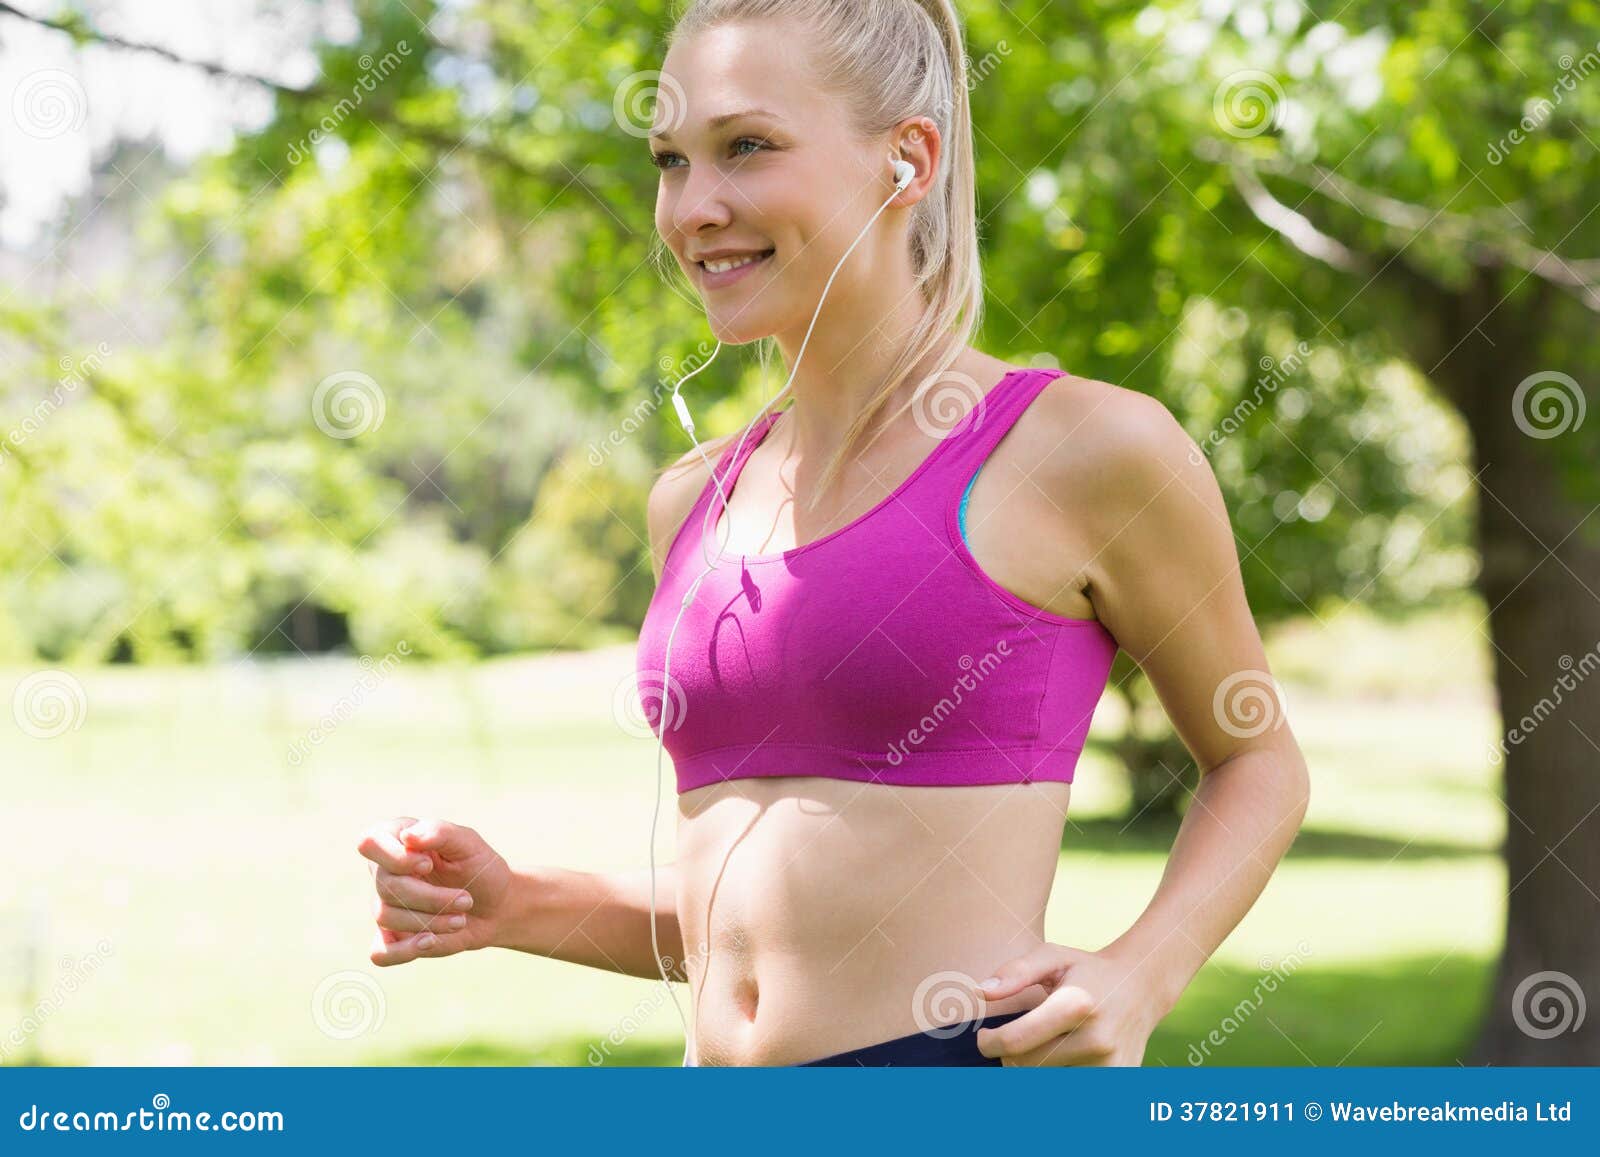 Healthy and Beautiful Young Woman in Sports Bra Jogging in Park